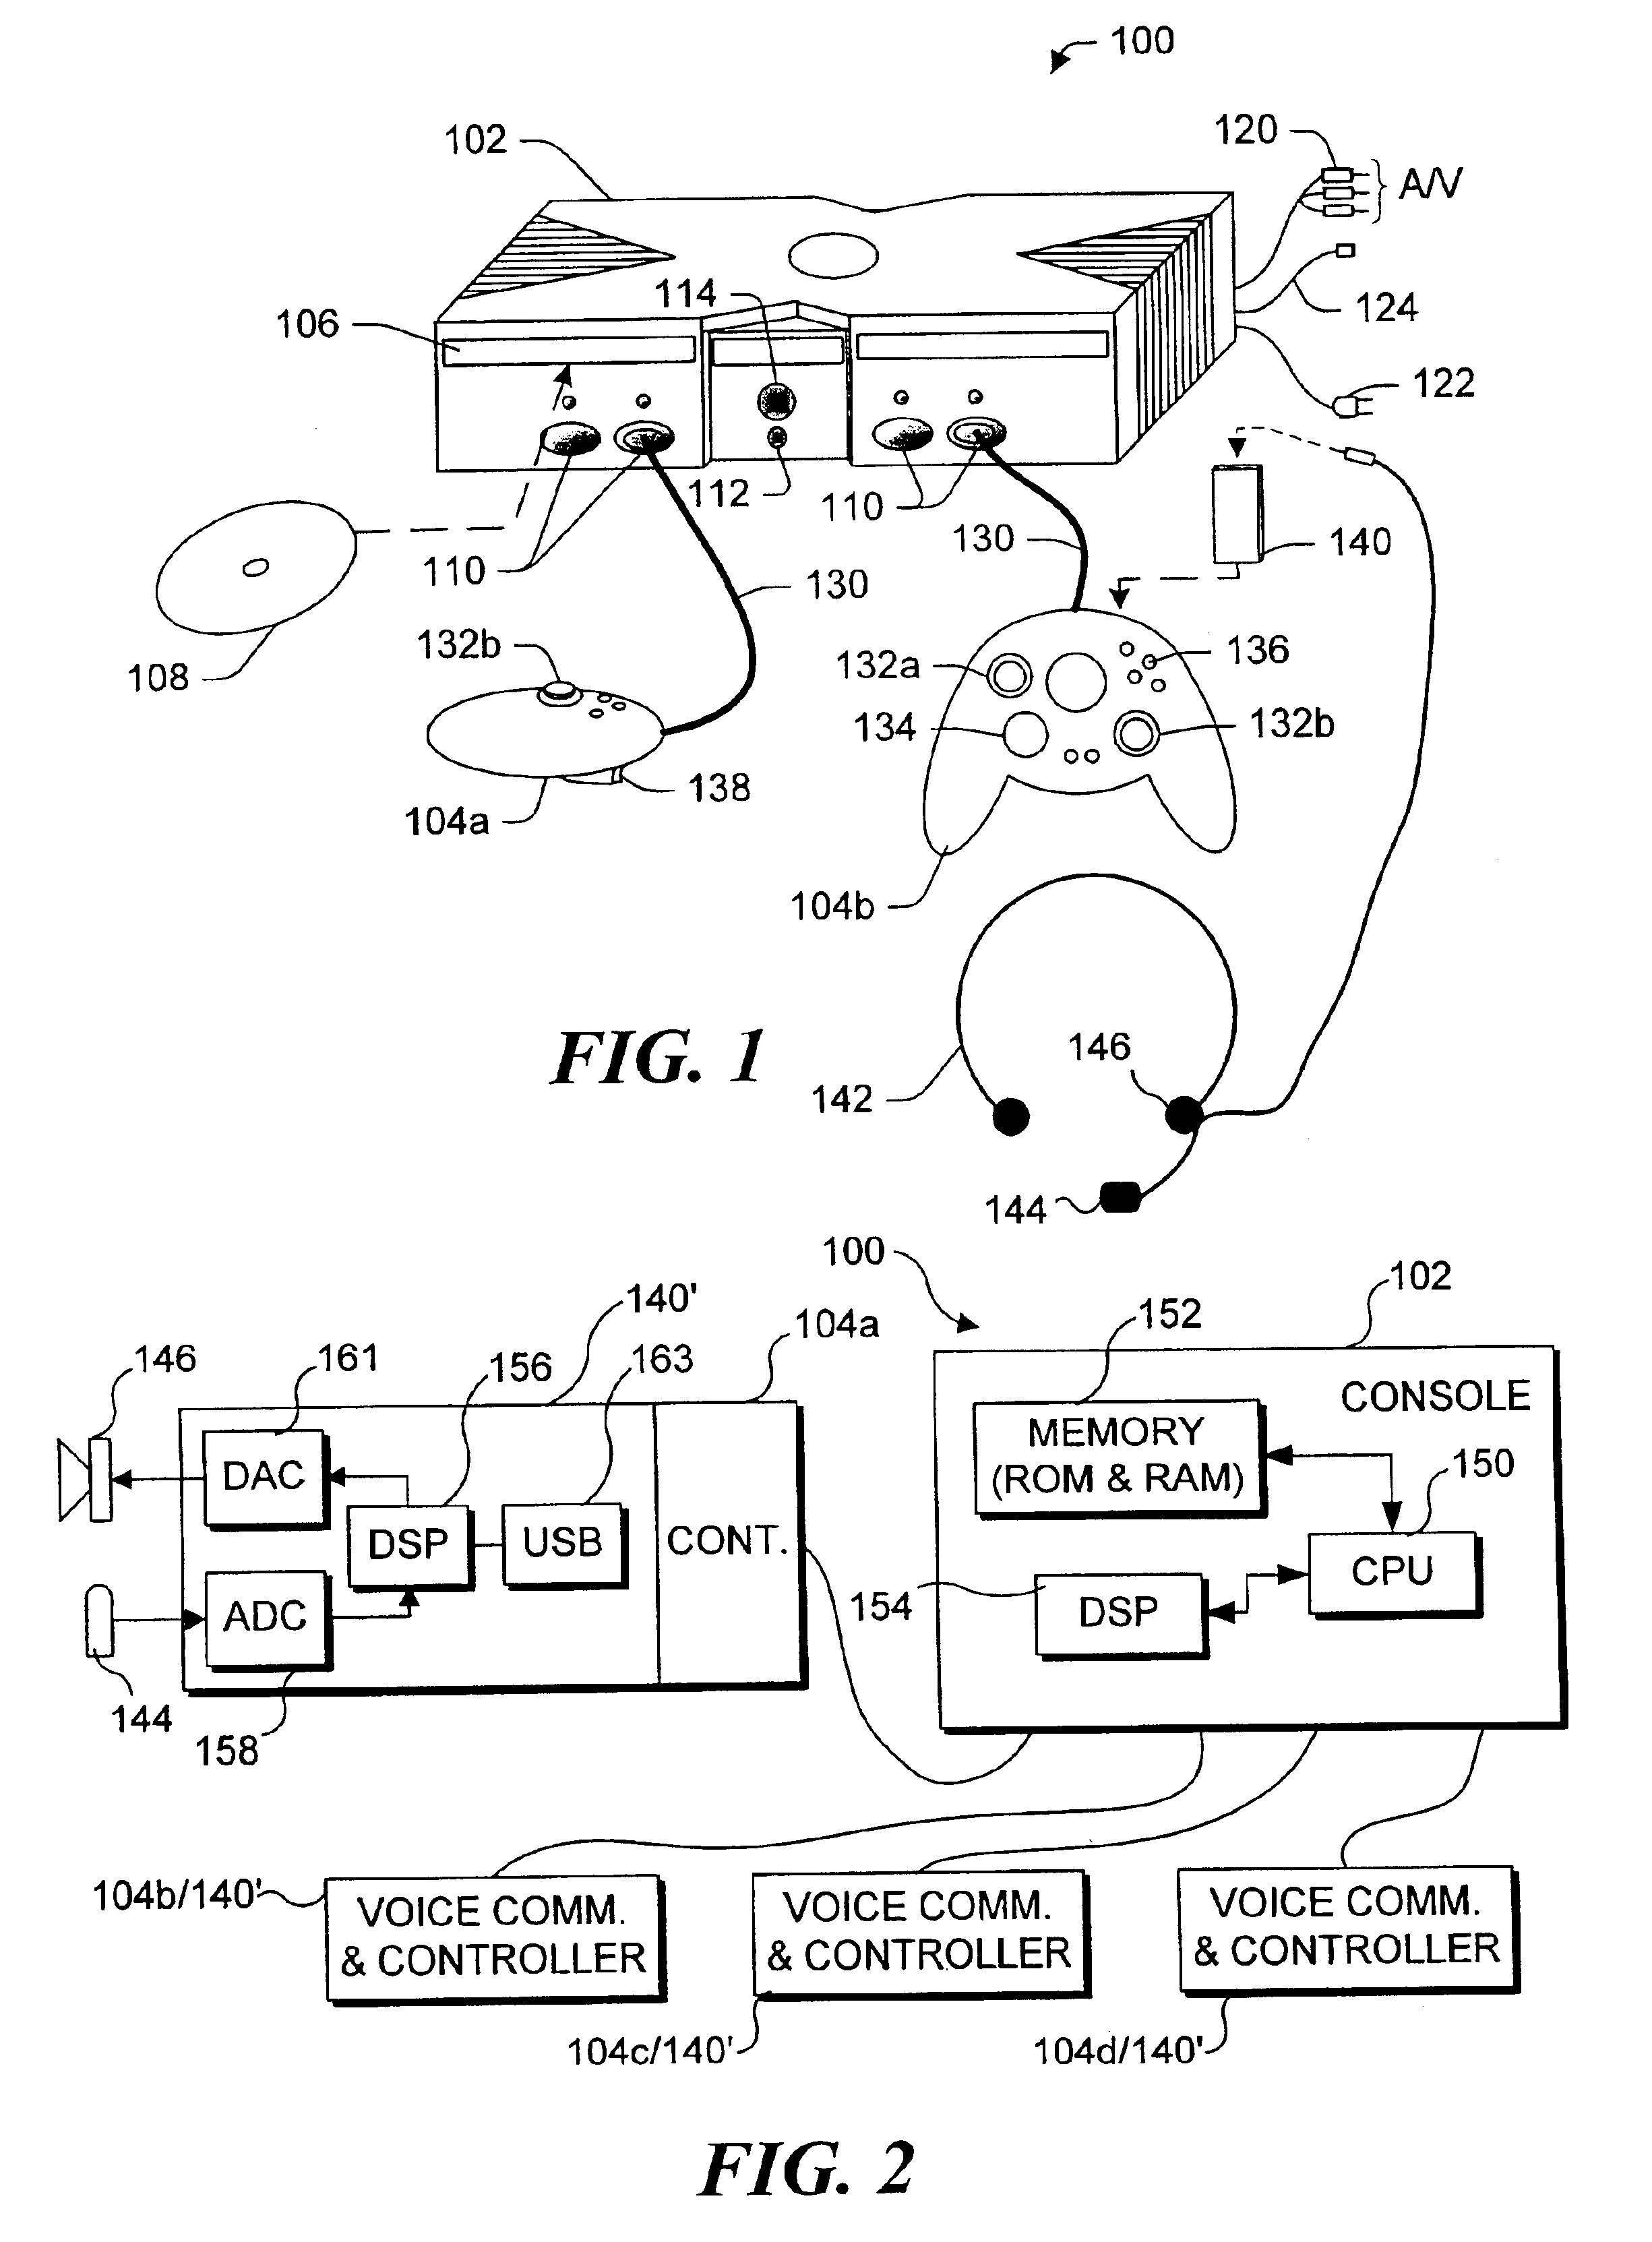 Banning verbal communication to and from a selected party in a game playing system